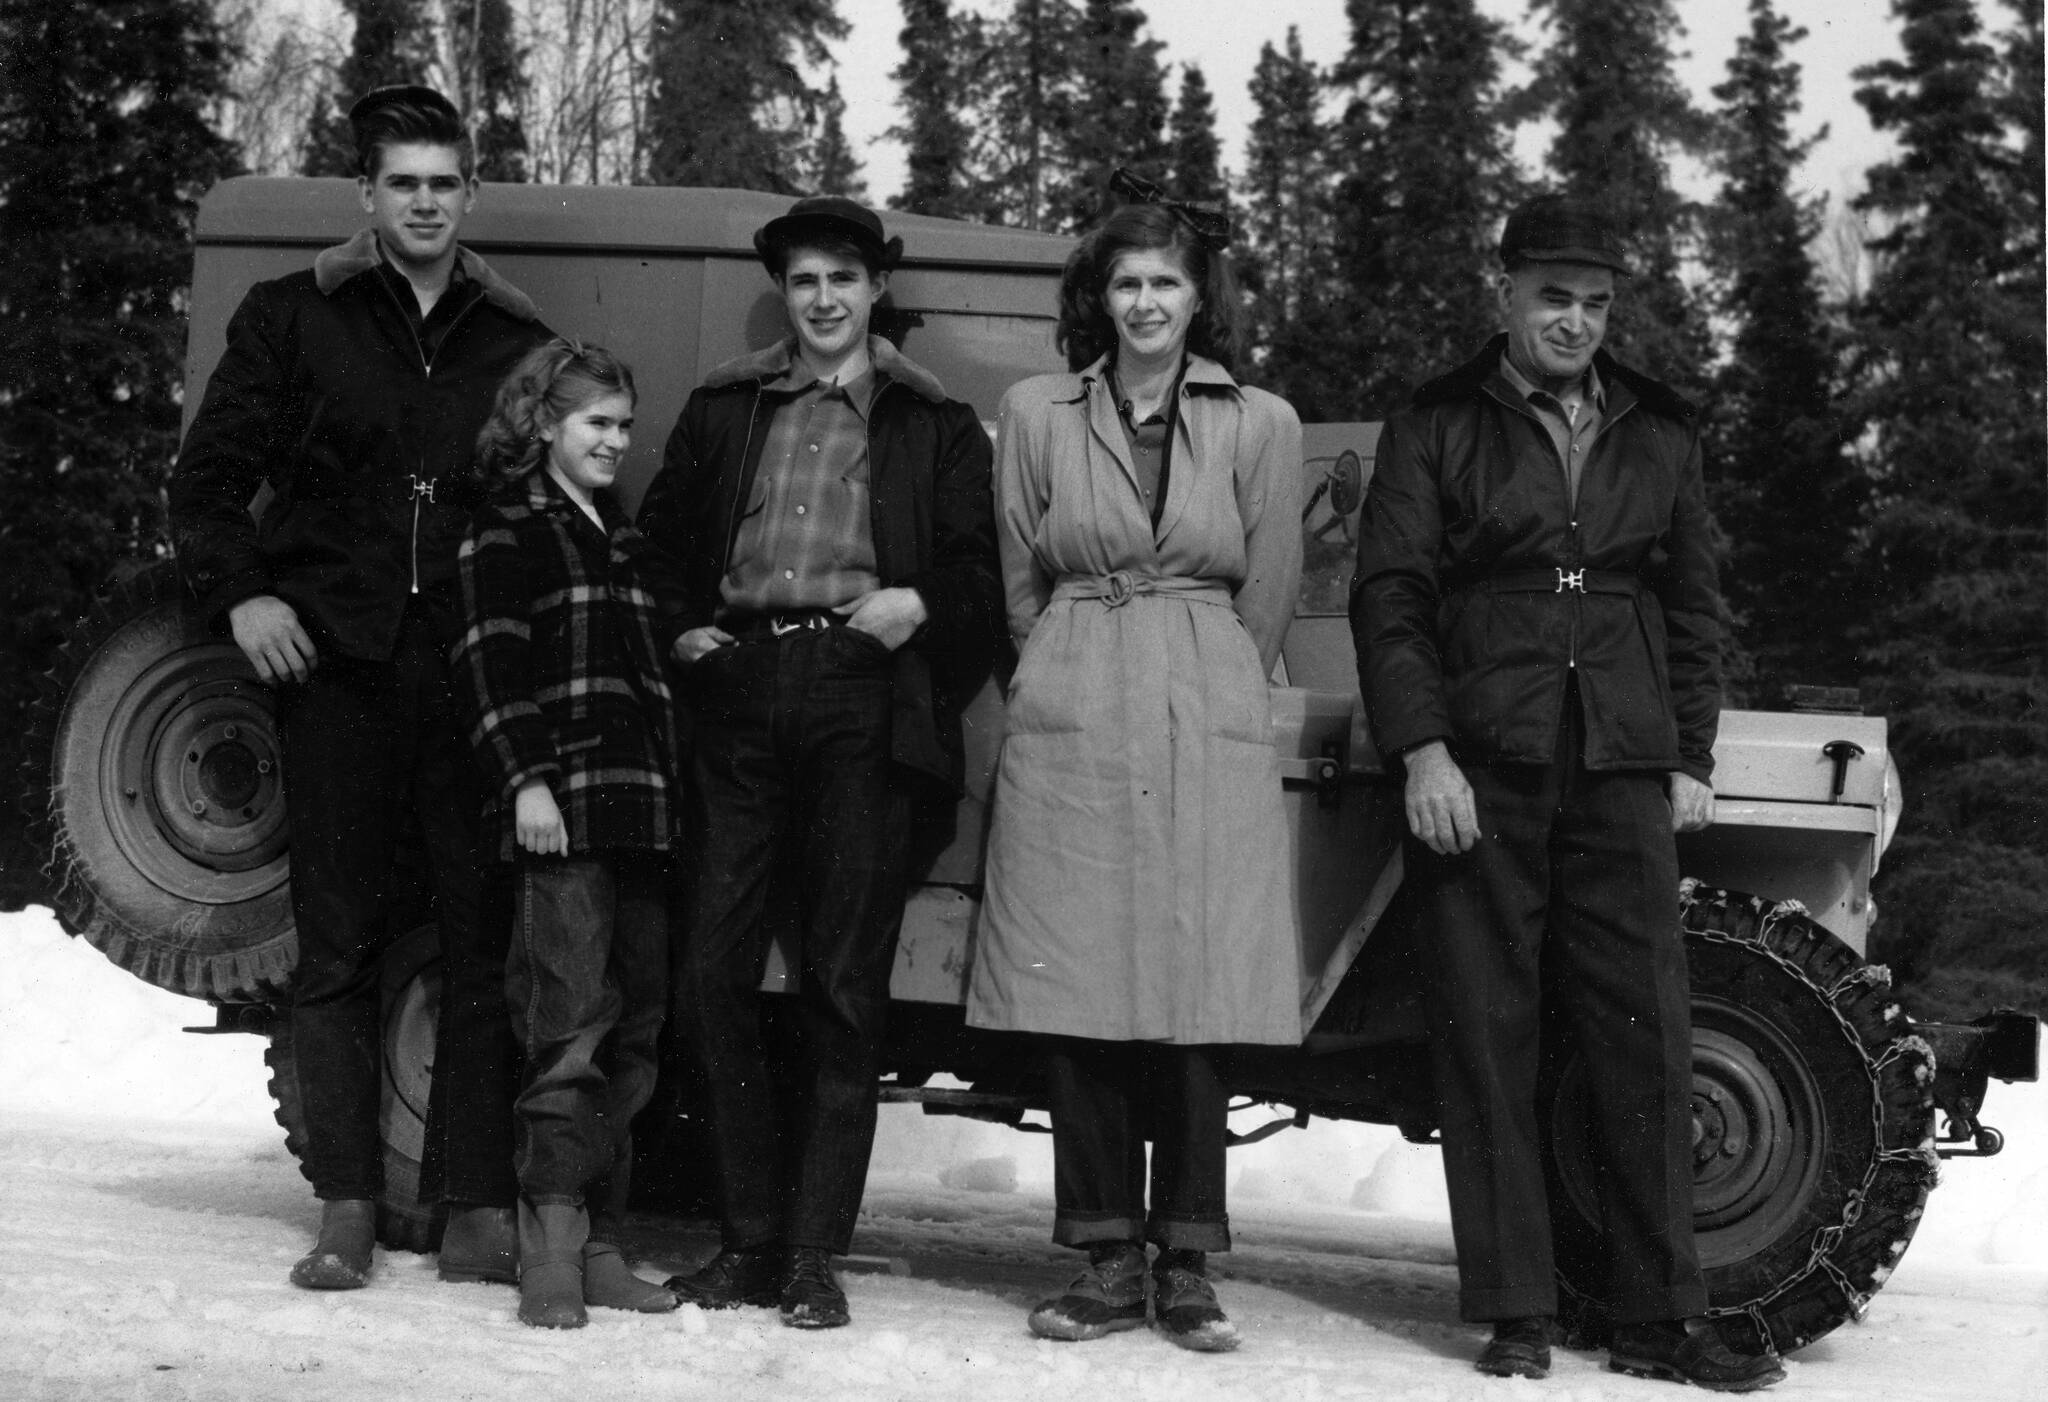 Photo courtesy of the Keeler Family Collection
In 1951, shortly after they had purchased their new jeep (pictured), the Keeler family (L-R: Larry, April, Marion, Lorna and Lawrence) used it to help another traveler extract his own vehicle from a snowy ditch. The other driver took this photo and later sent a copy of the image to the Keelers.